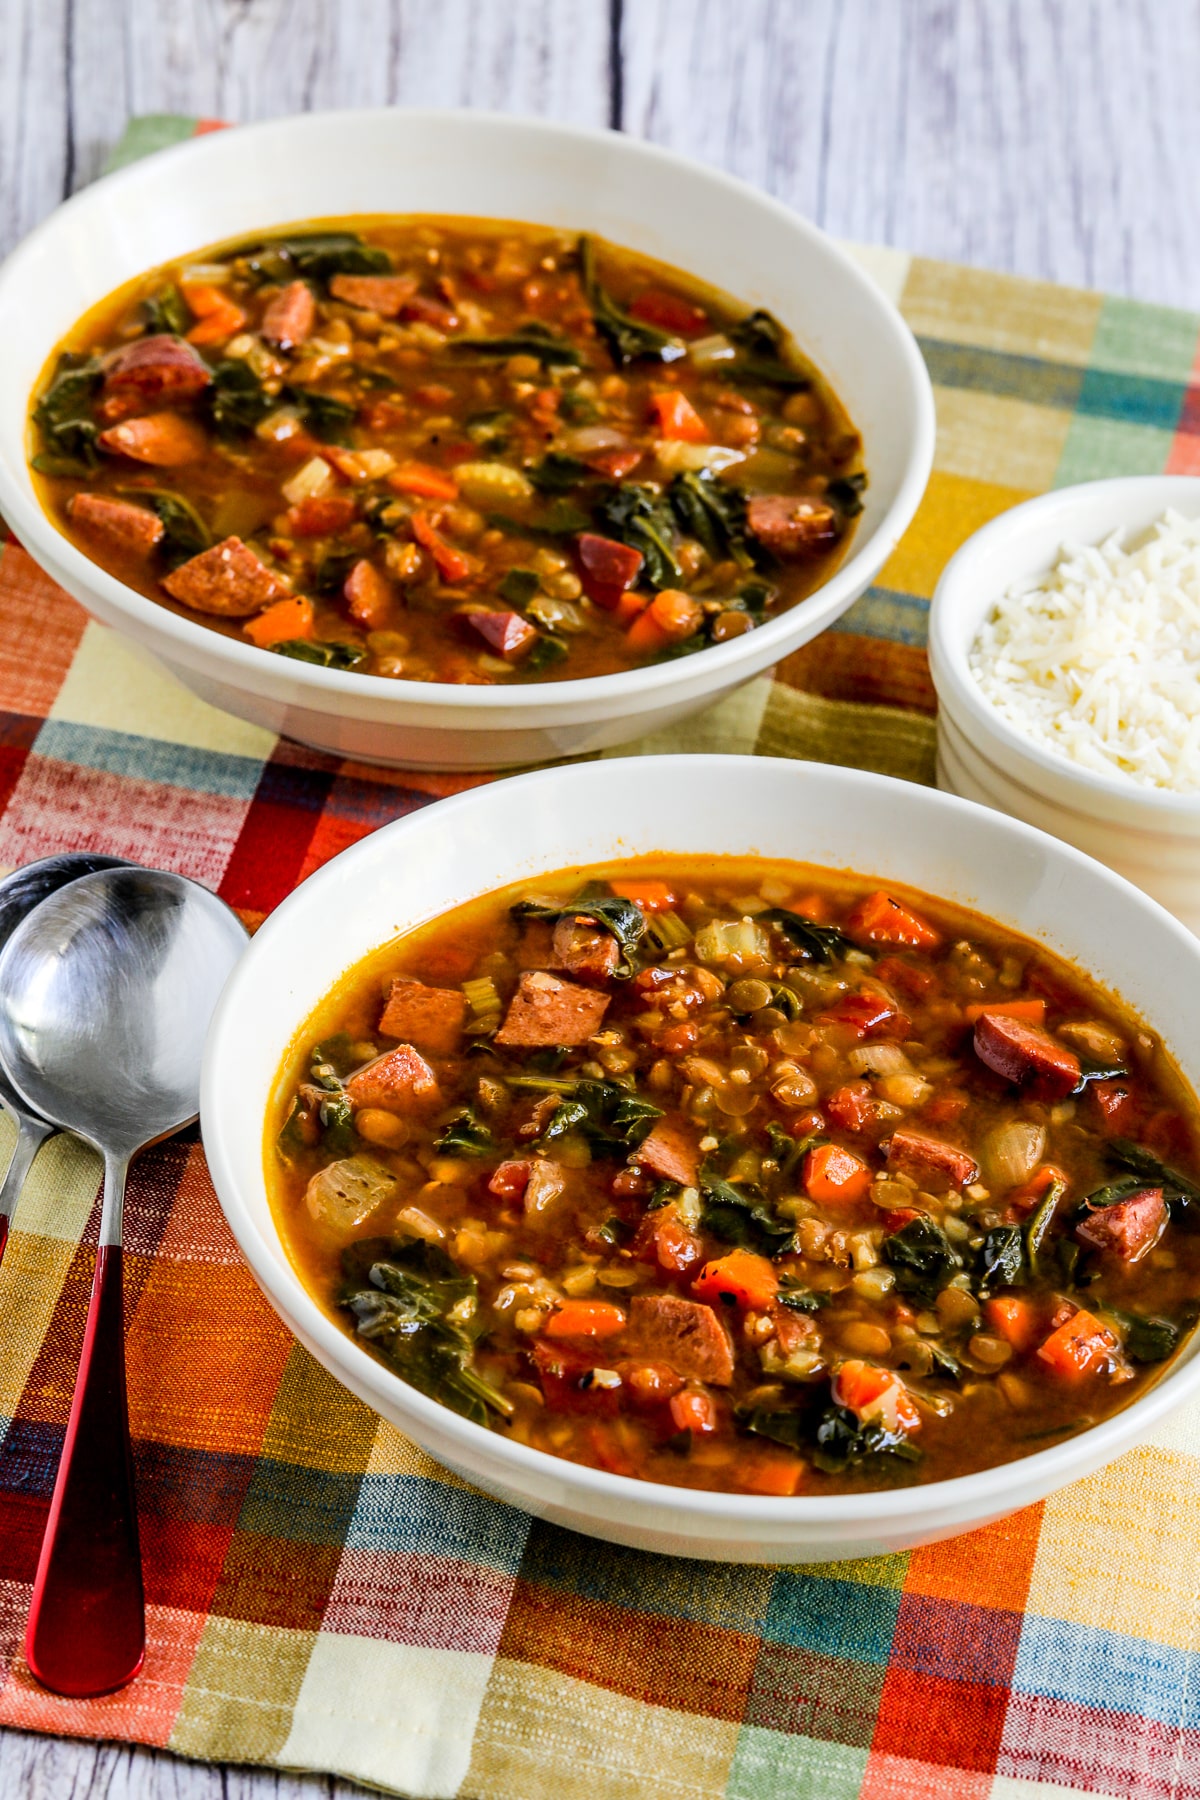 Sausage Lentil Soup with Spinach shown in two soup bowls